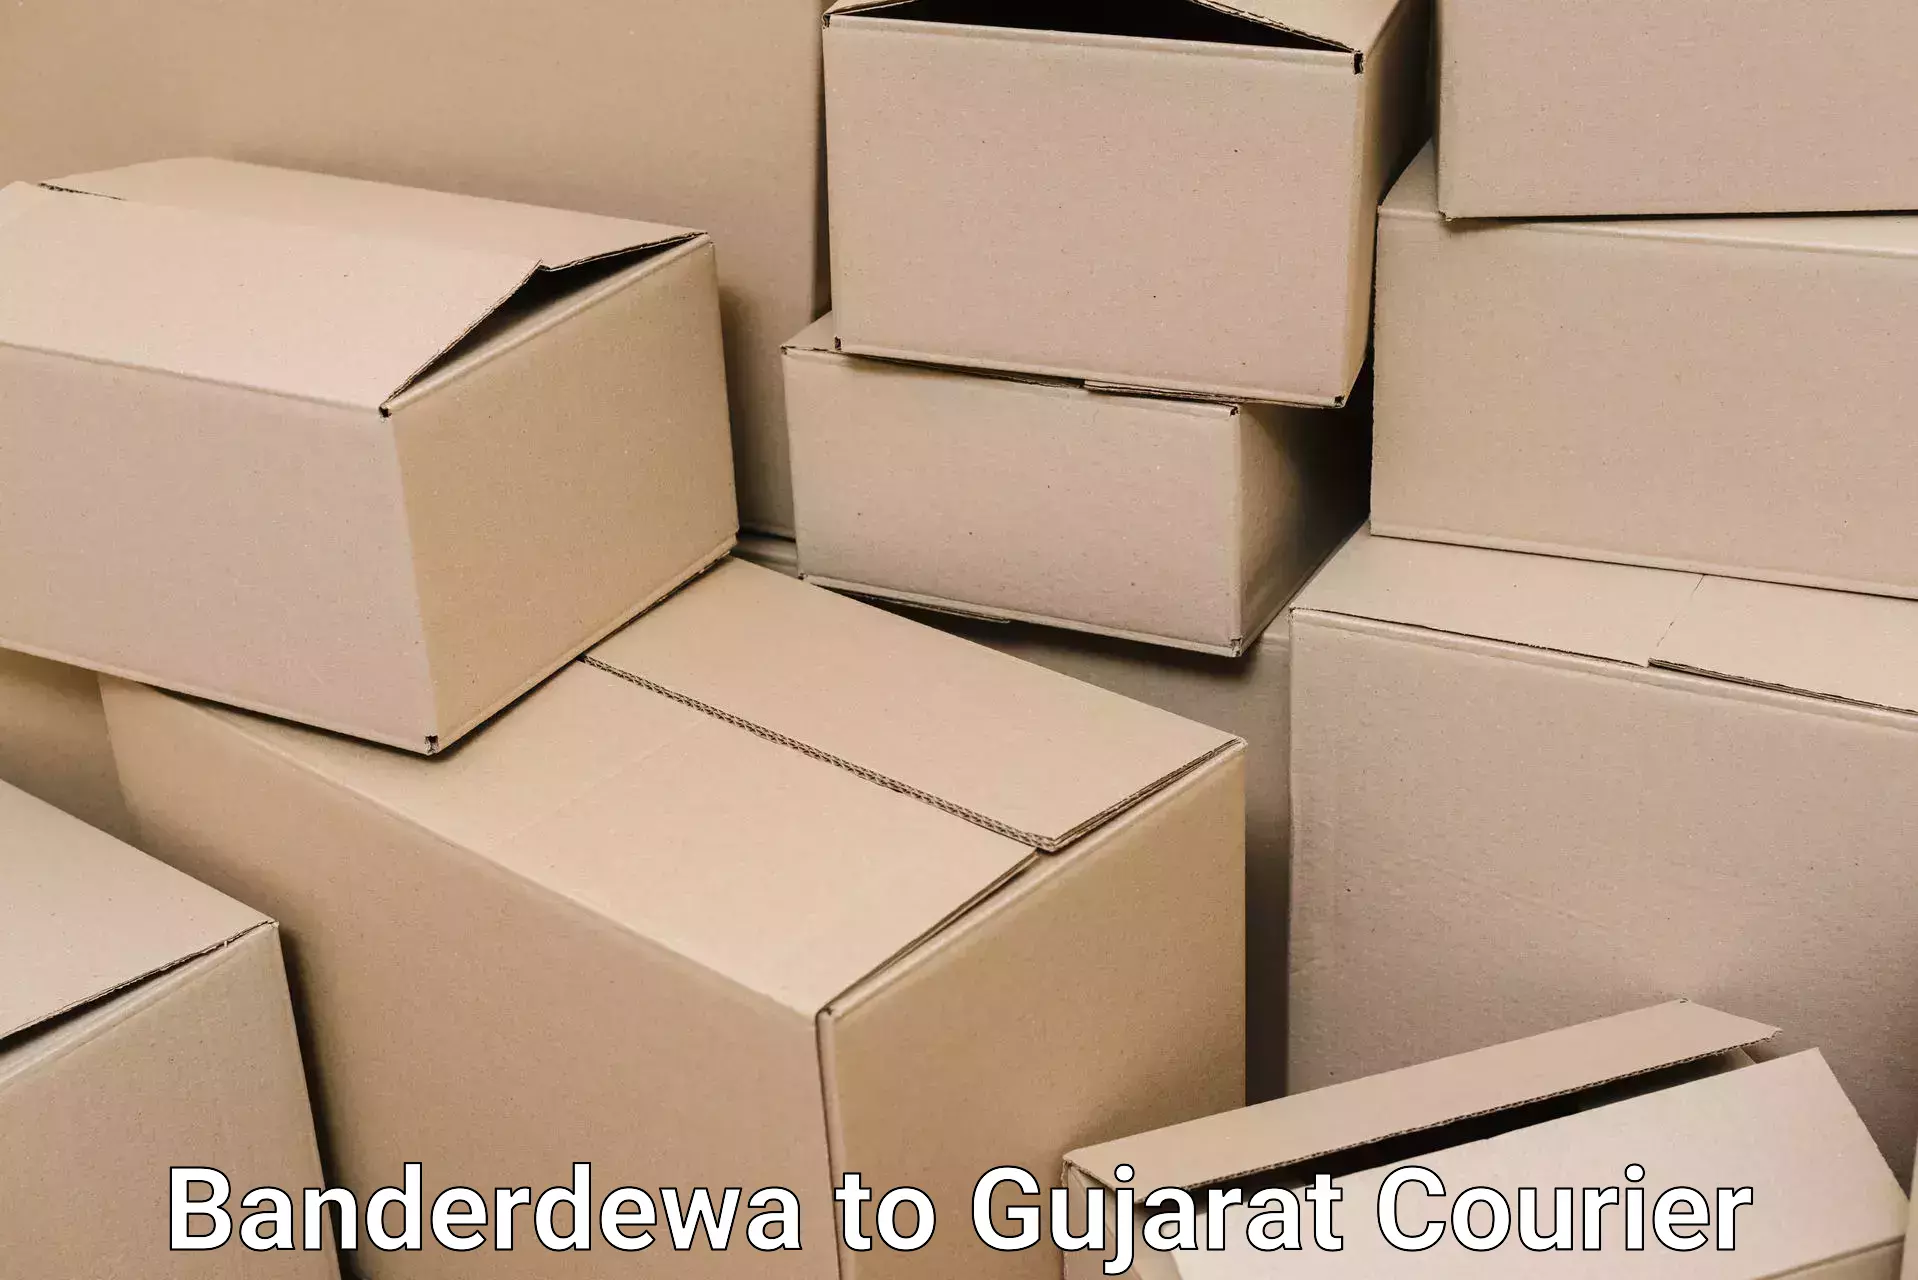 Comprehensive relocation services in Banderdewa to Palanpur